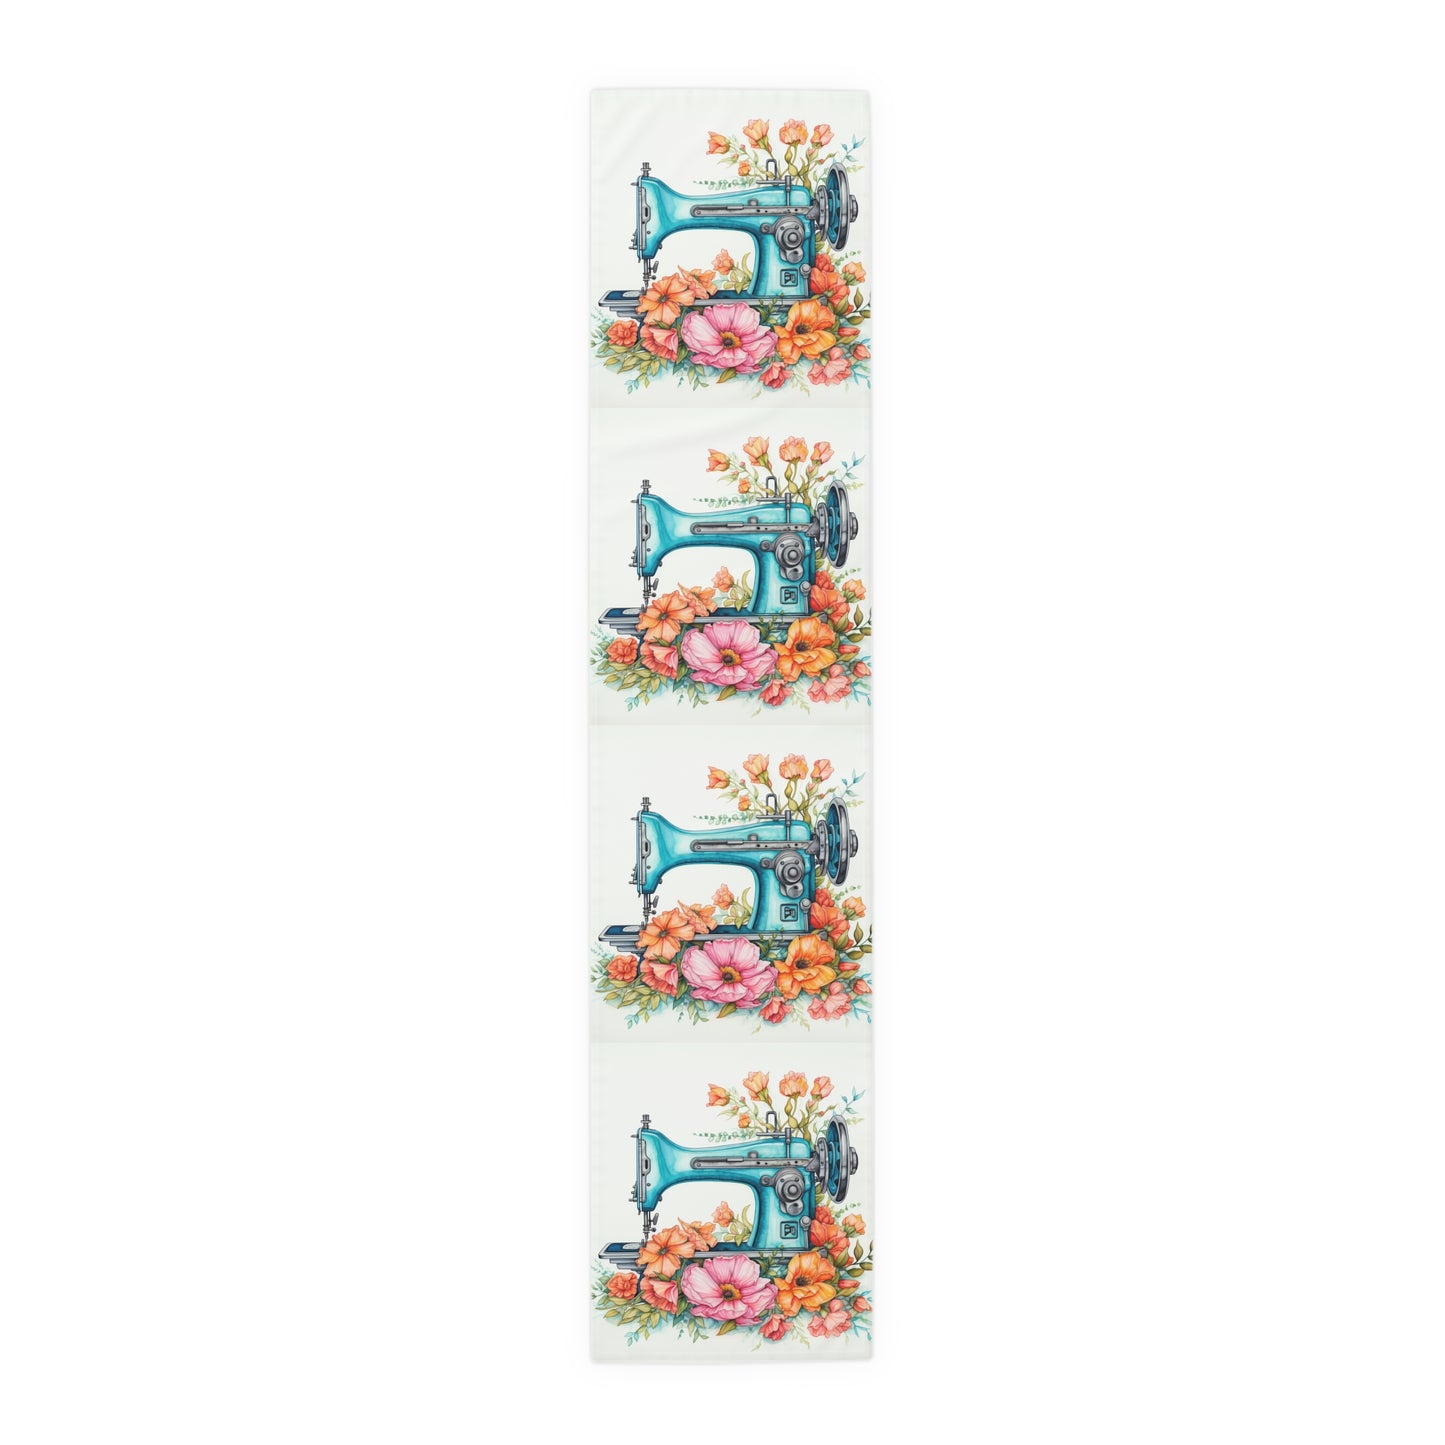 Aqua Blue Sewing Machine and Floral Watercolor Illustration, Artistic Craft - Table Runner (Cotton, Poly)